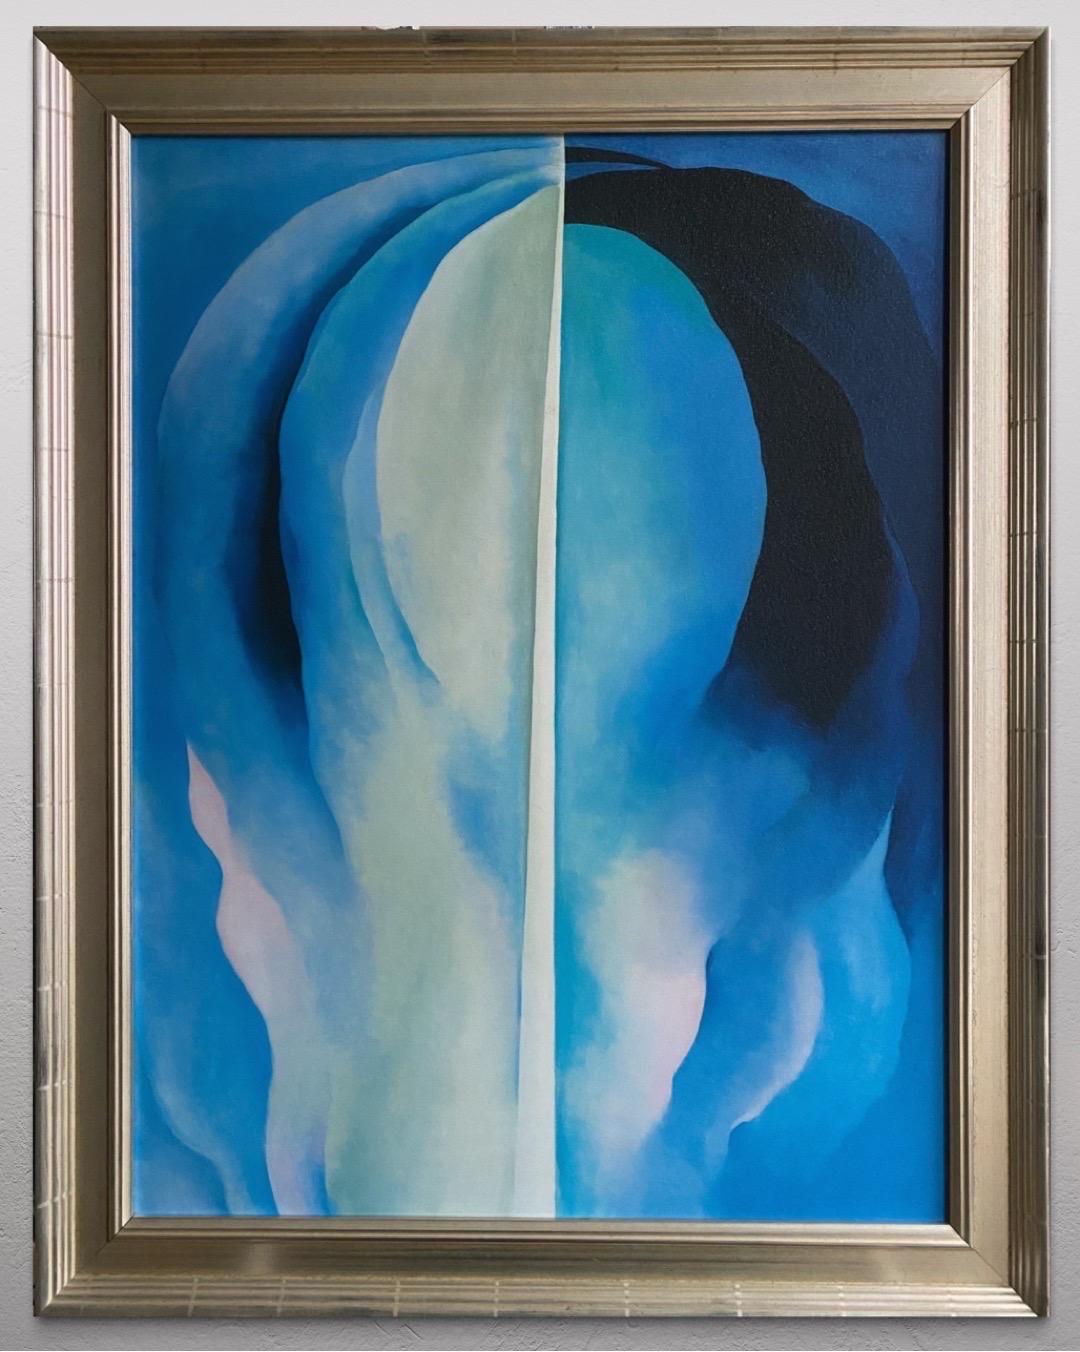 Georgia O'Keeffe-High Quality print by MoMA circa1997-Abstraction Blue-GSYStudio For Sale 2